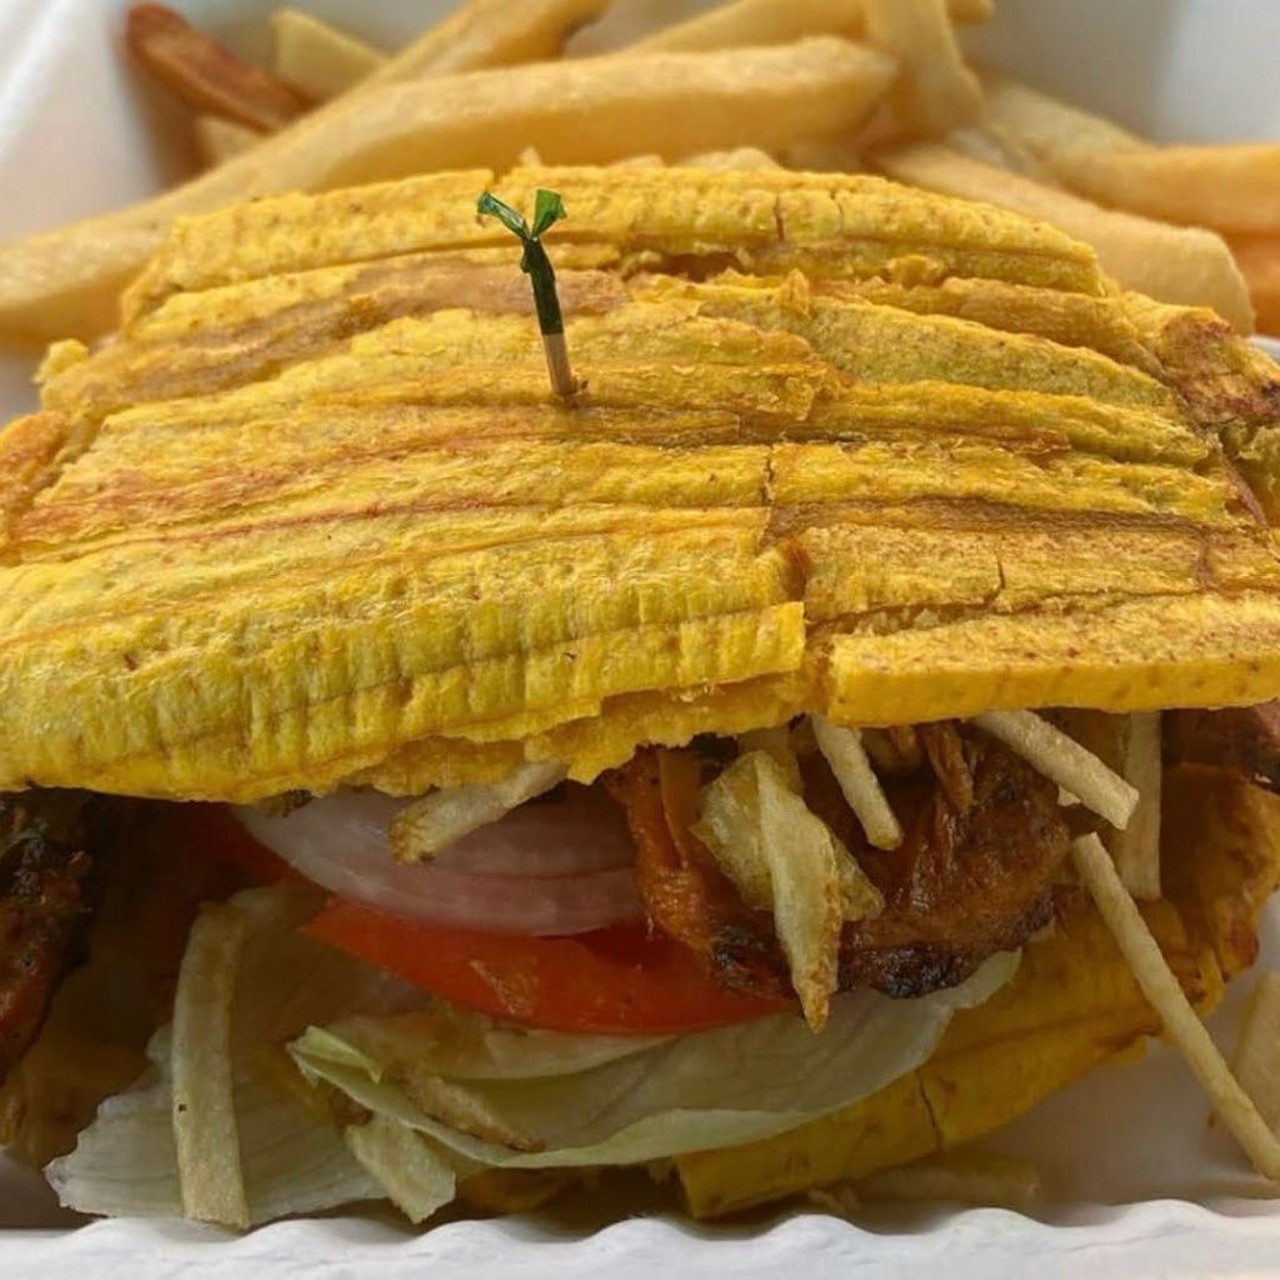 The Earthy Kitchen 
9318 East Colonial Dr.,A-9 Orlando, FL 32817, (407) 601-6841
Puerto Rican, plant-based home cooking at your service. They have mofongo, tripleta, cubanos, papas locas, empanadas and tres leches. These are to die for and they will satisfy all your cravings.
Photo via The Earthy Kitchen/Facebook